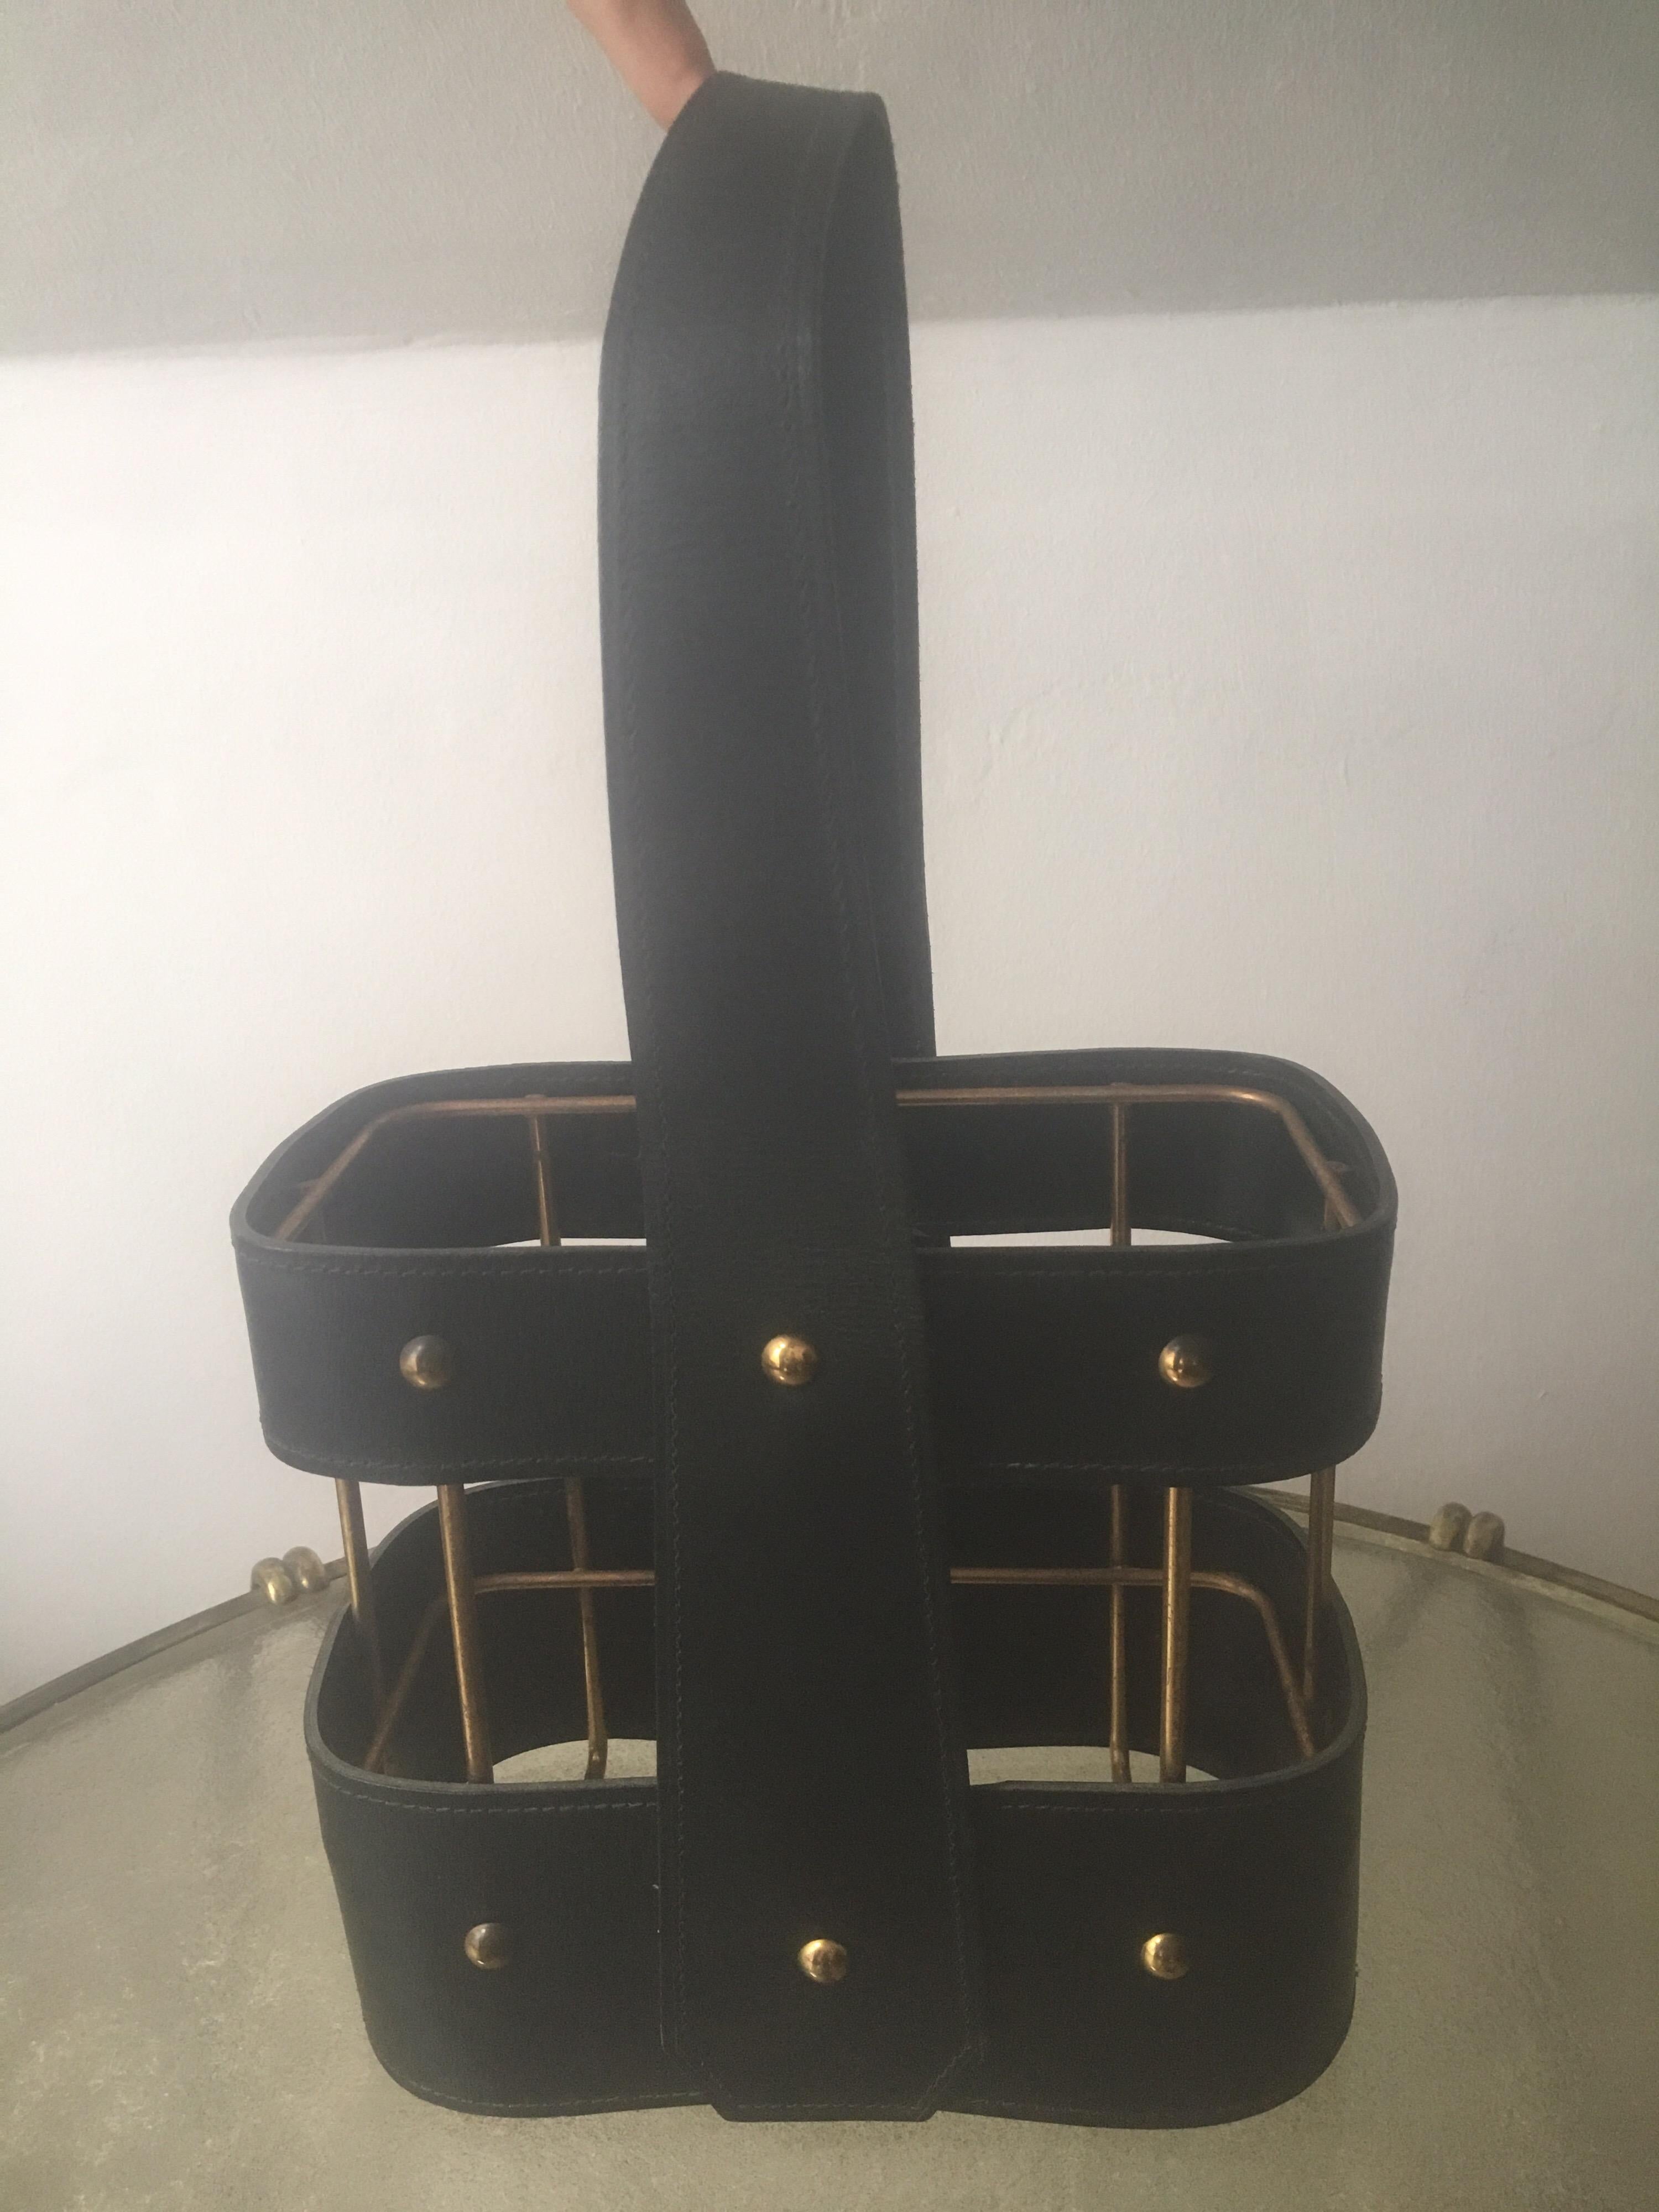 An elegant black leather and brass bottle holder designed by Jacques Adnet in France in 1950s. 
It can carry 2 bottles. The leather handle is in good condition and vintage patina on the brass.
Maximum height with raised handle: 39 cm / 15.35 inch.